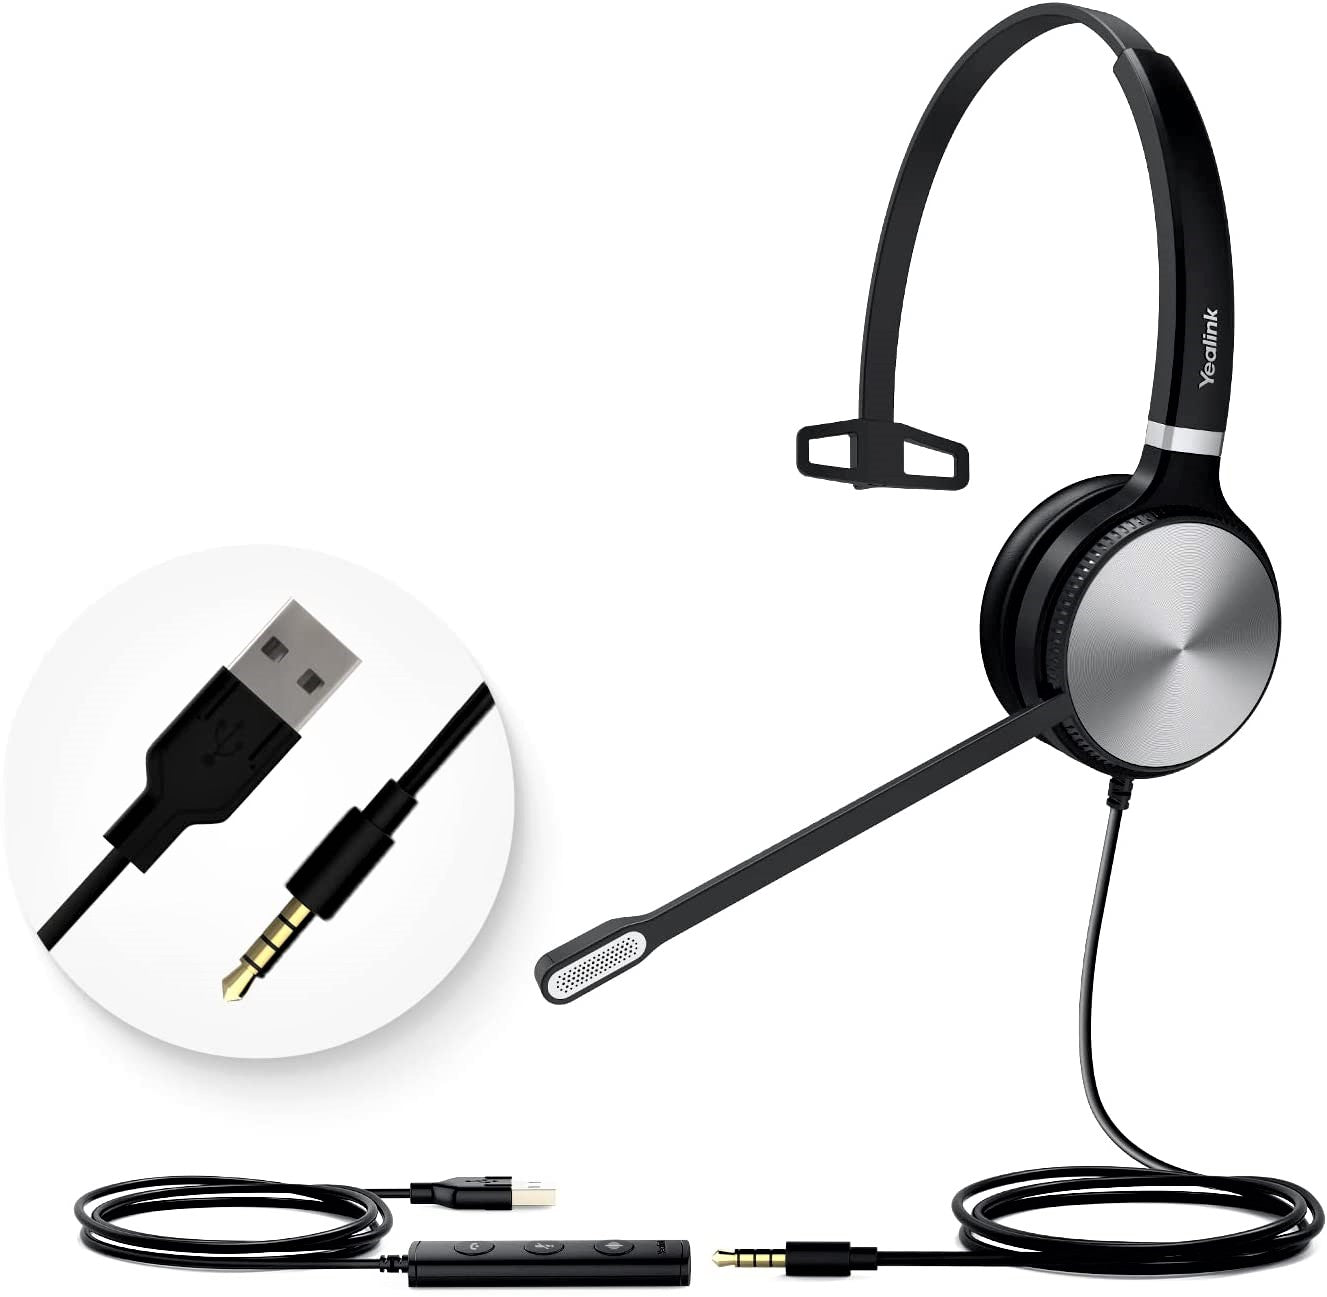 Yealink Teams Certified Telephone Headset Microphone USB Wired UH36 UH34 Noise Cancelling with Mic for Computer PC Laptop Stereo for Calls and Music 3.5mm Jack (Teams Optimized, UH36-Mono)